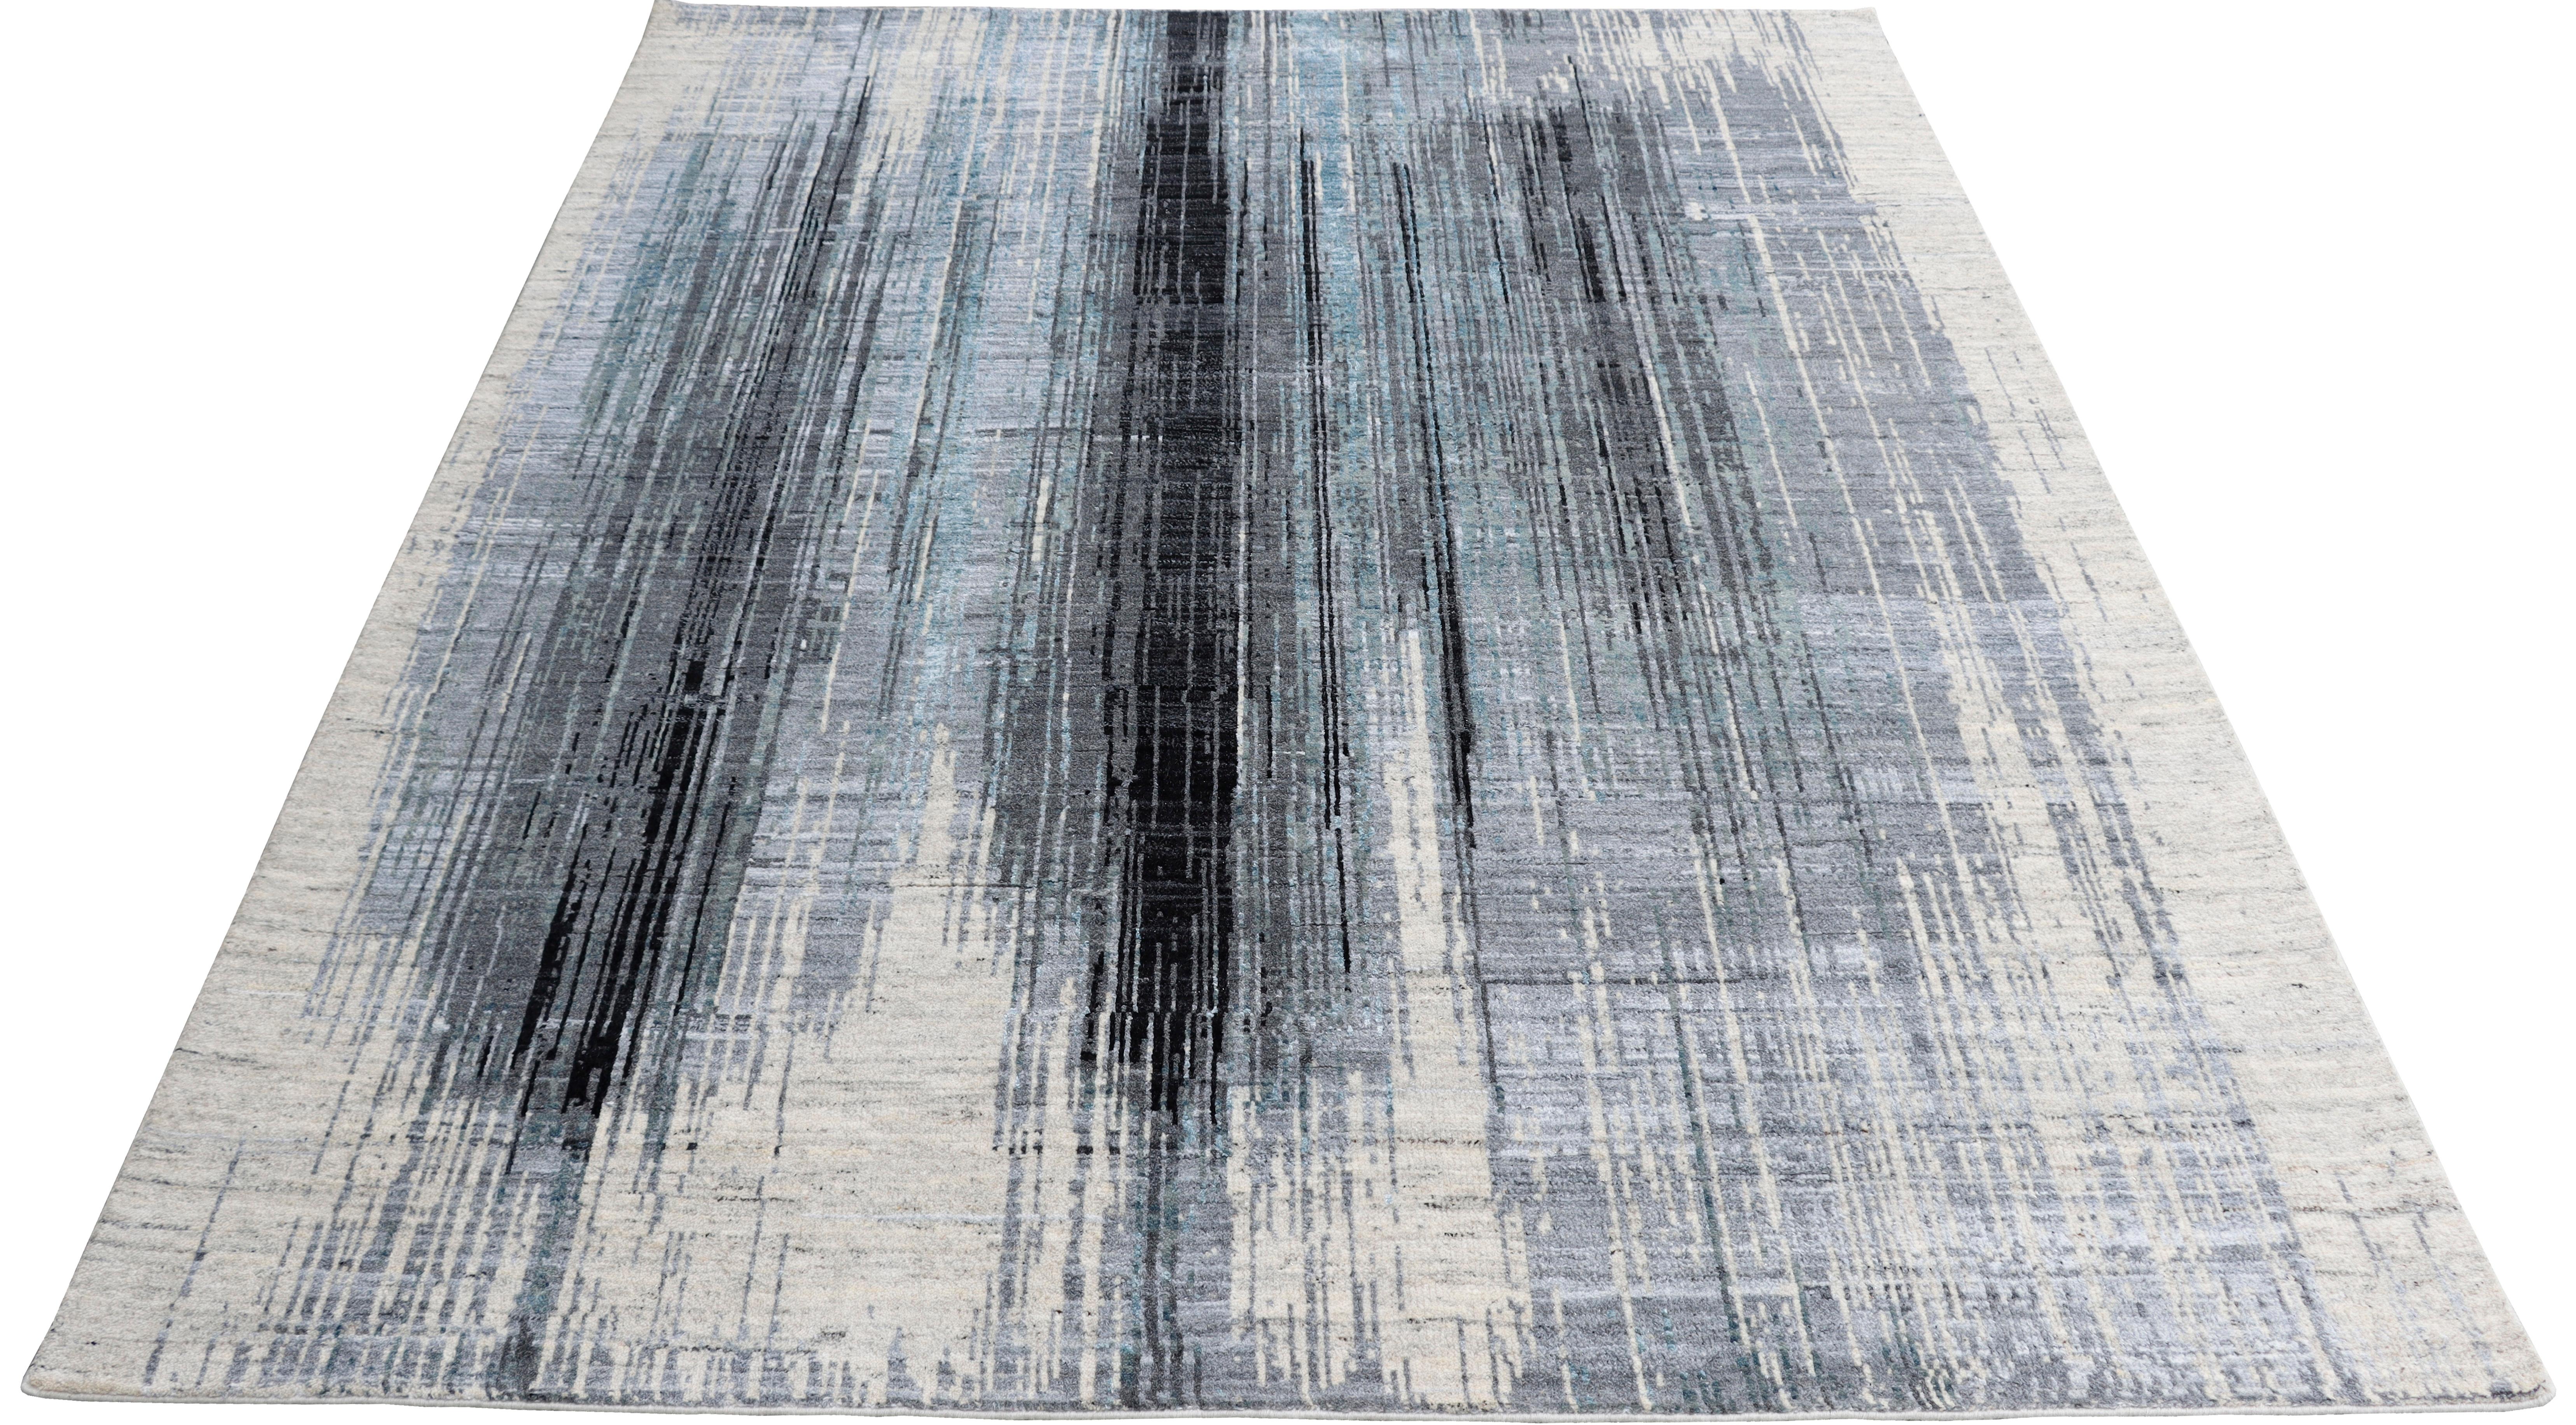 The contemporary classic designs bridge the gap between transitional and Postmodern, with an overall classic sensibility. Rug patterns include abstract, geometric, overall, organic, patchwork and jacquard patterns. The hand-knotted rugs are